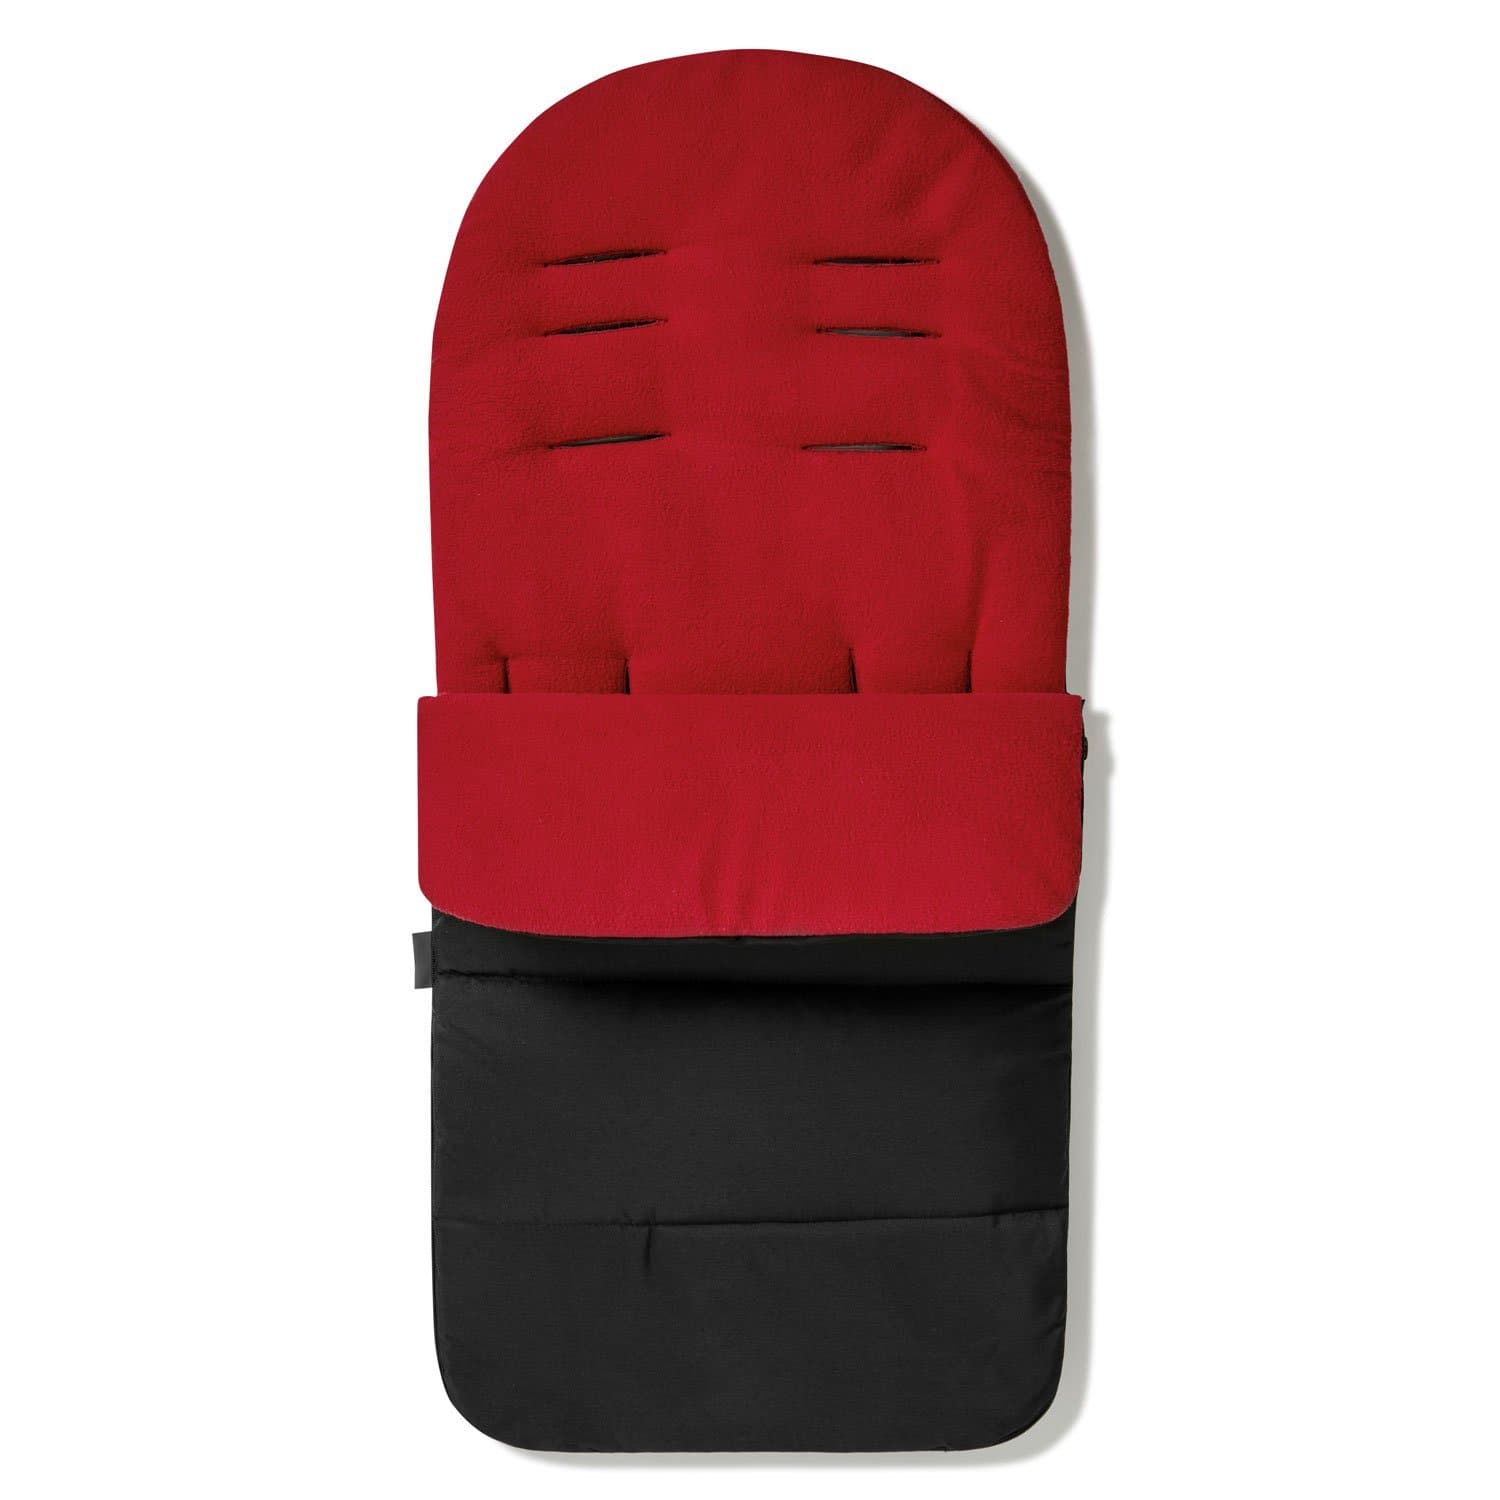 Premium Footmuff / Cosy Toes Compatible with Casual - For Your Little One